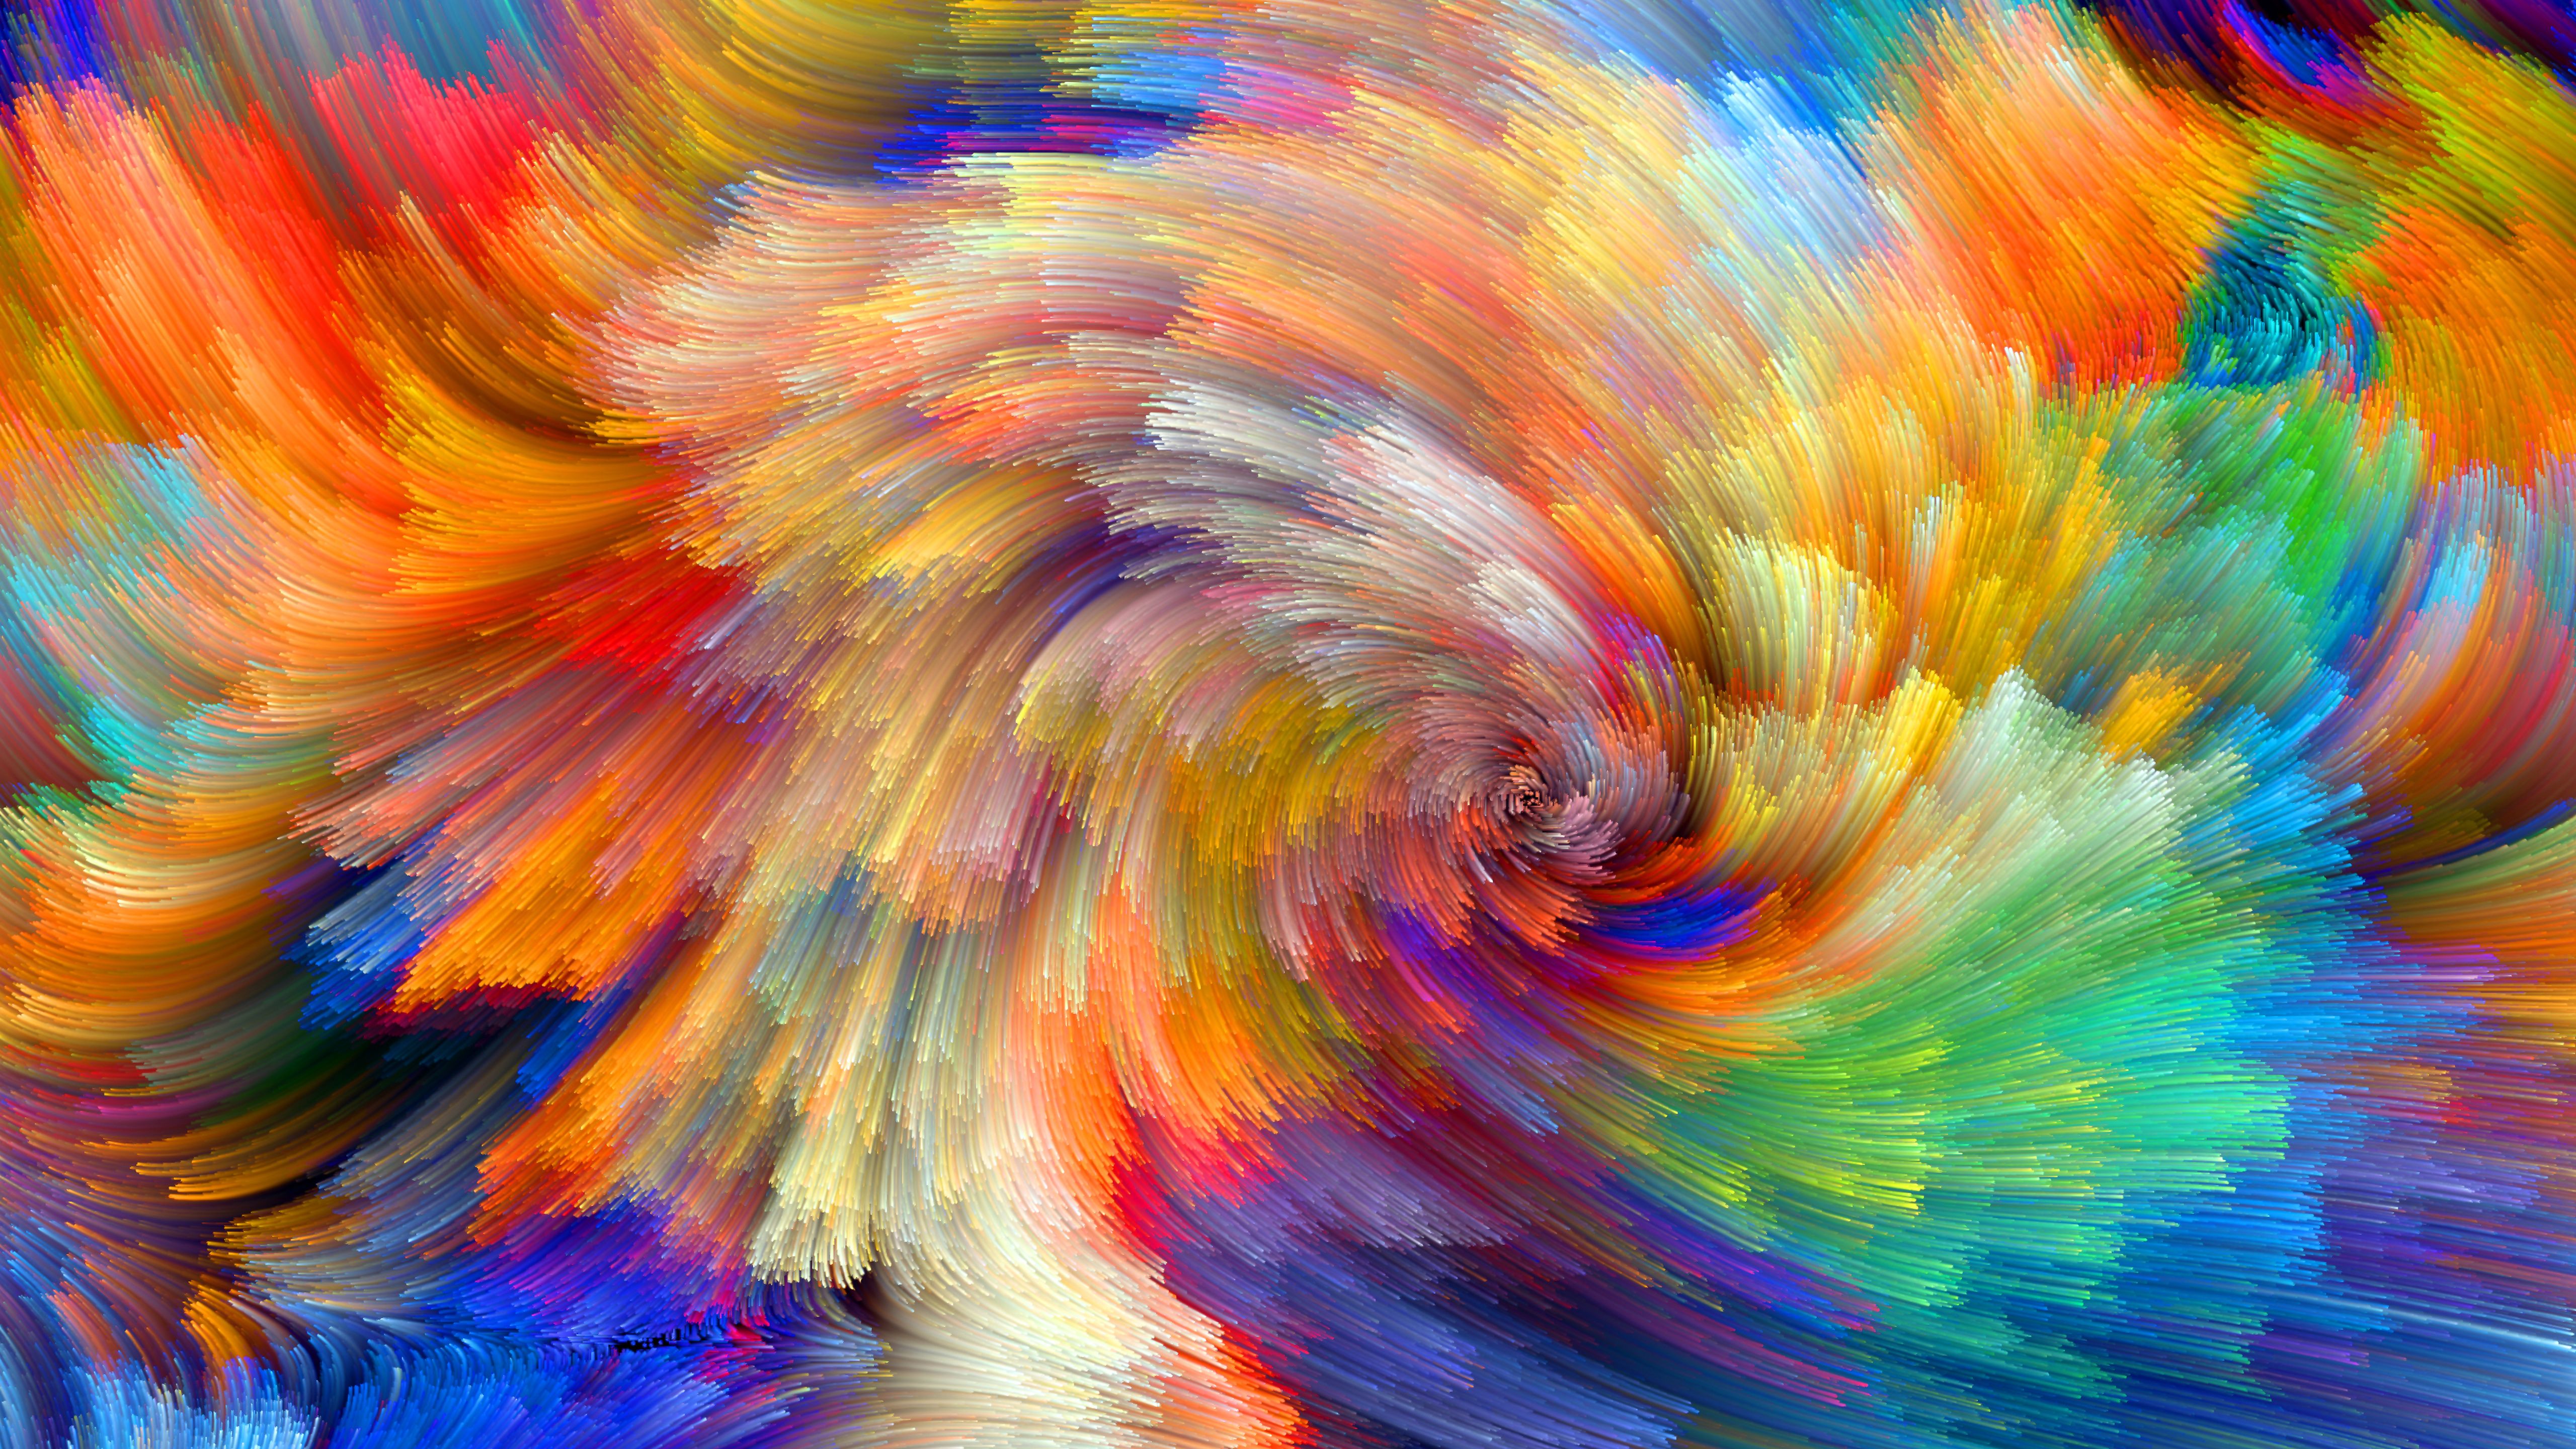 Wallpapers Vibrant, Colorful, Bloom, Fractals, Textures, 5K, Abstract